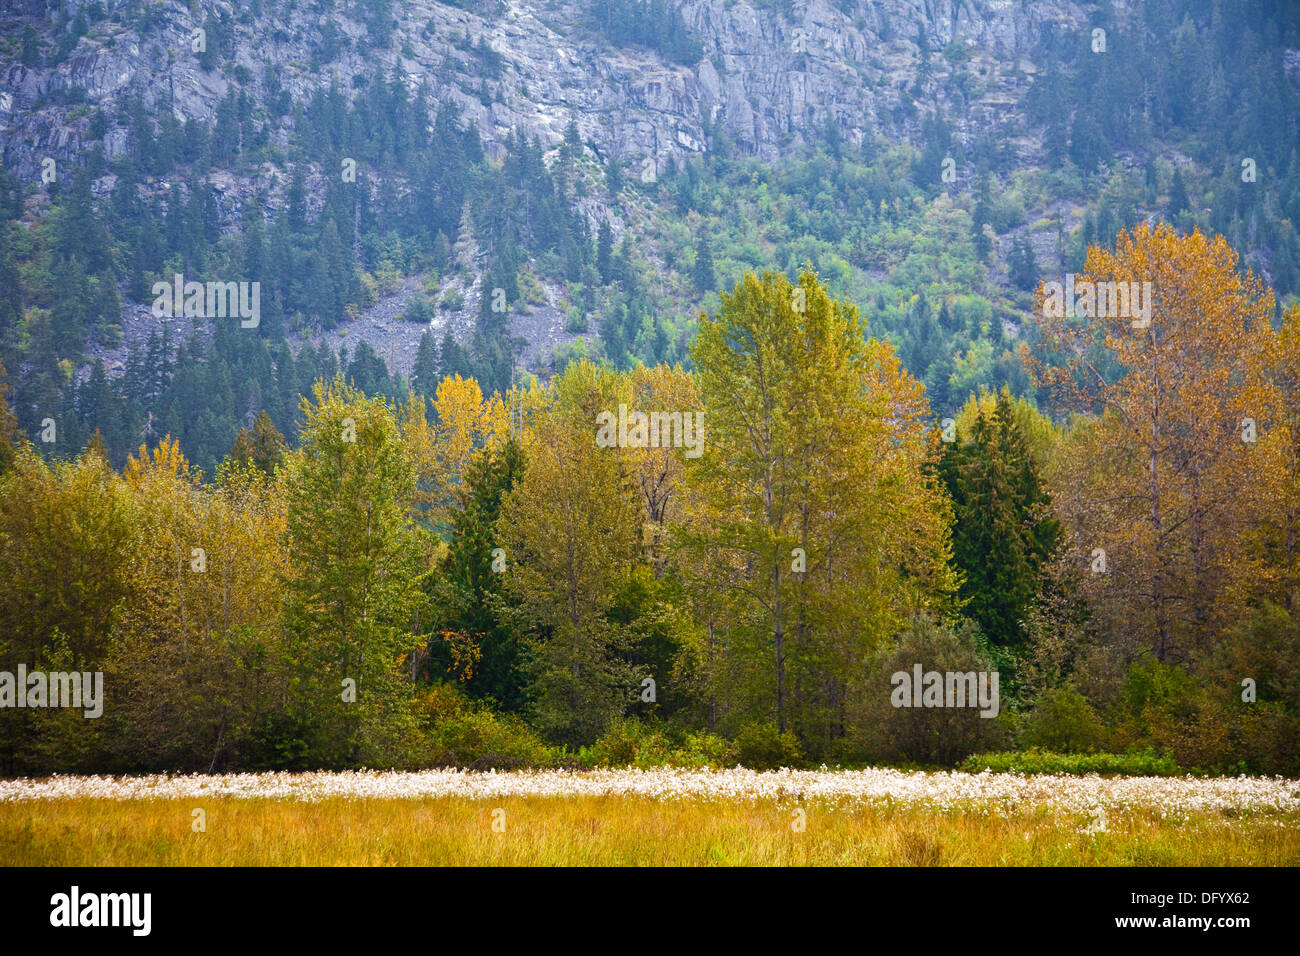 Farmland and forest in the Pemberton Valley, B.C. Canada Stock Photo